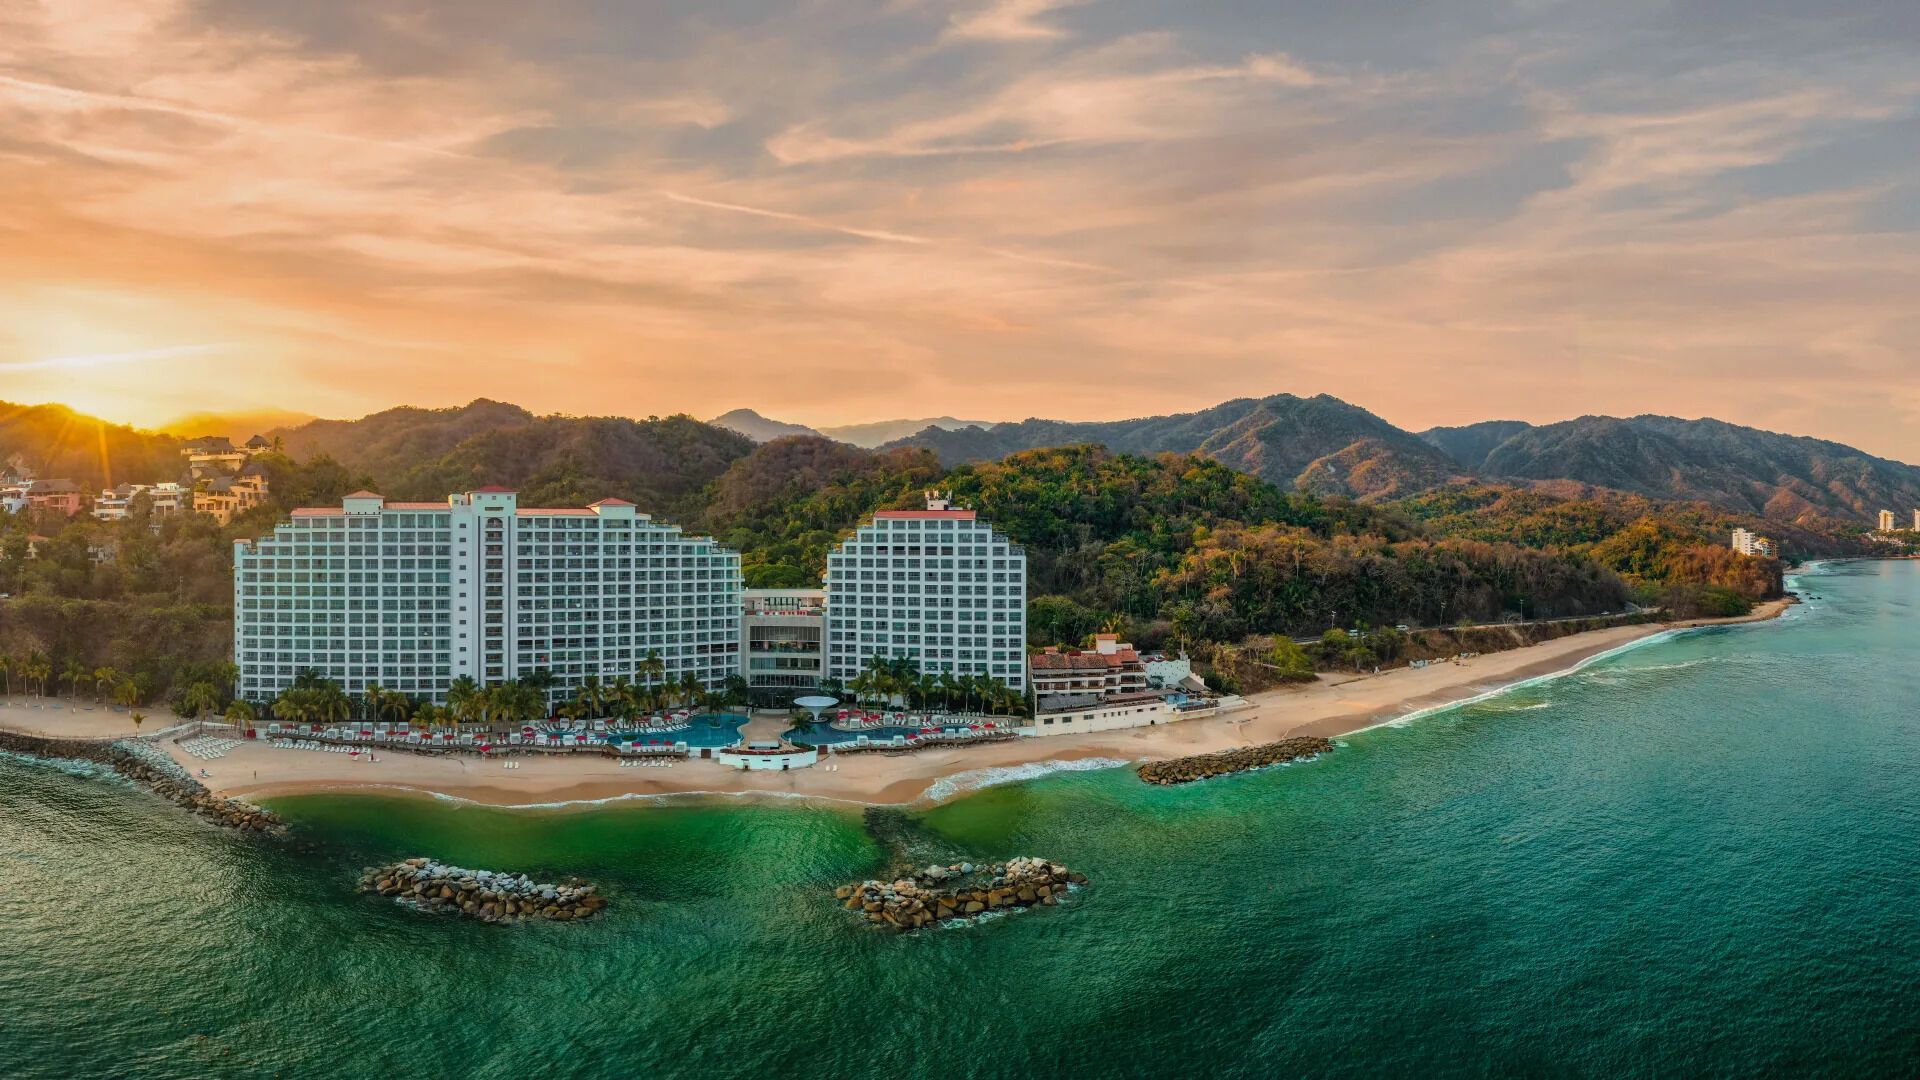 The best all-inclusive Hilton resorts. Hotels where the list of included services will enhance your vacation experience